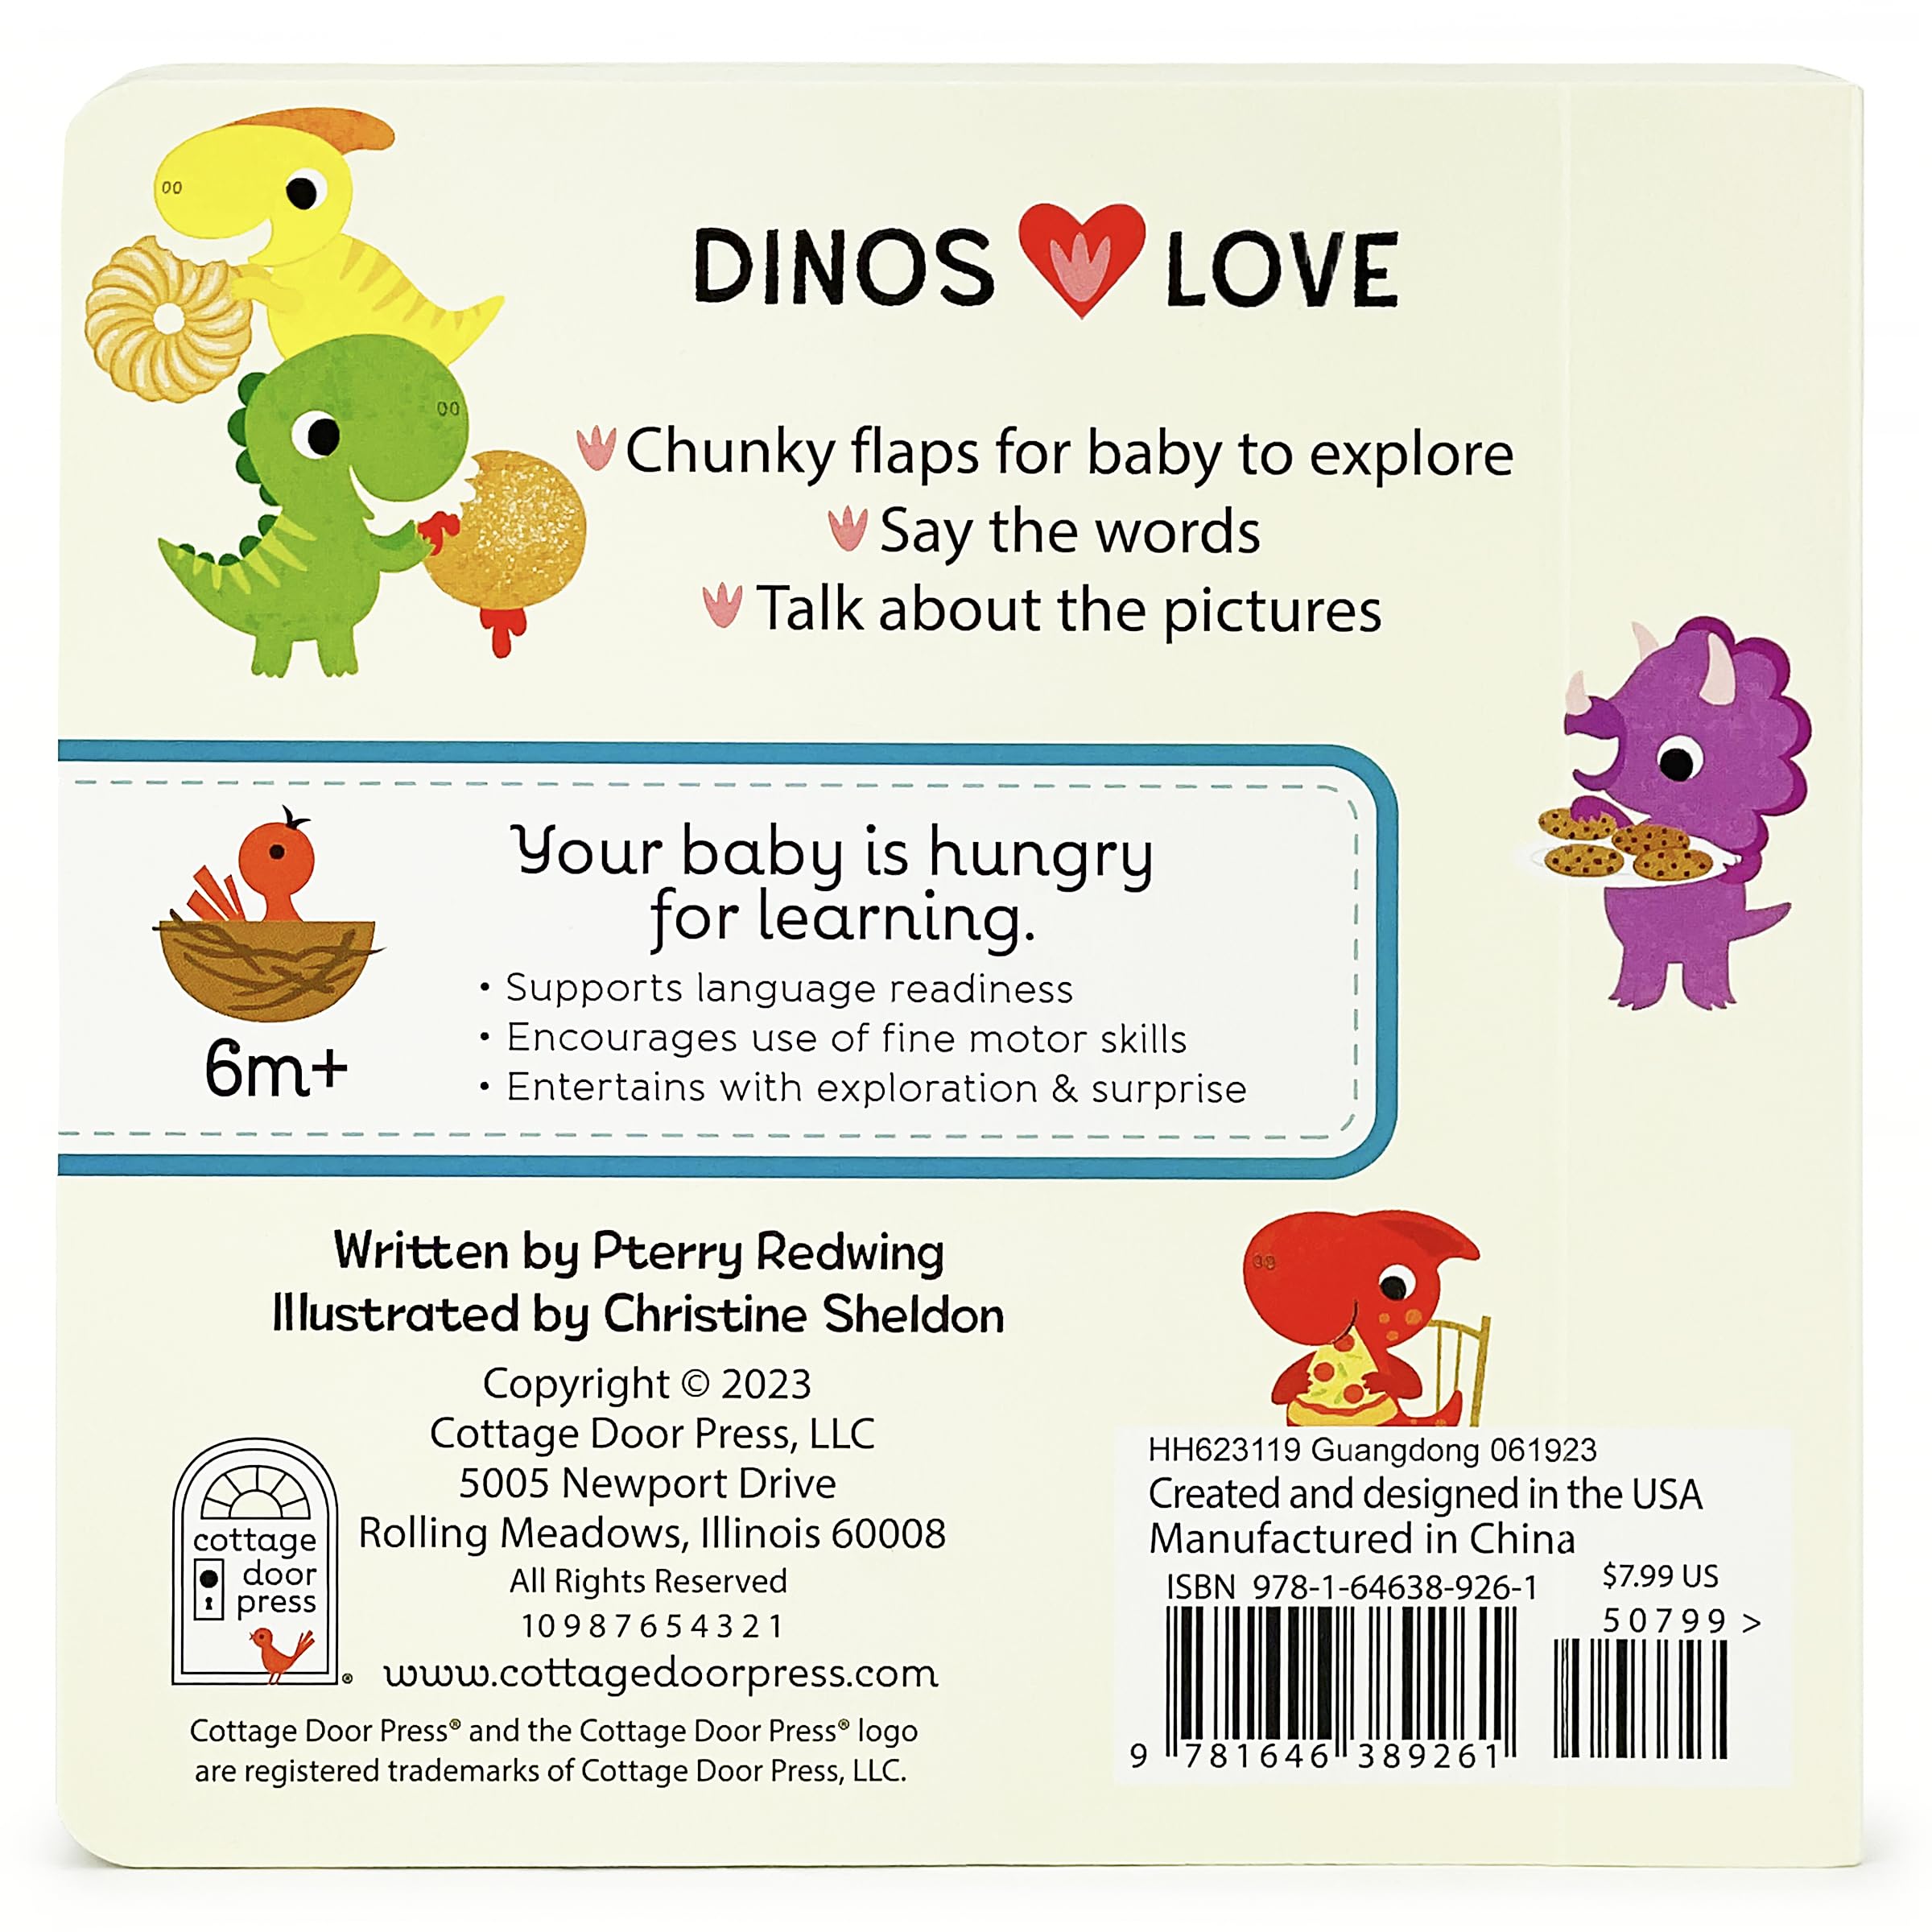 Dinos Love Donuts - A Foodie Lift-a-Flap Board Book for Babies and Toddlers to Introdue Trying New Foods; A Fun Dinosaur Adventure